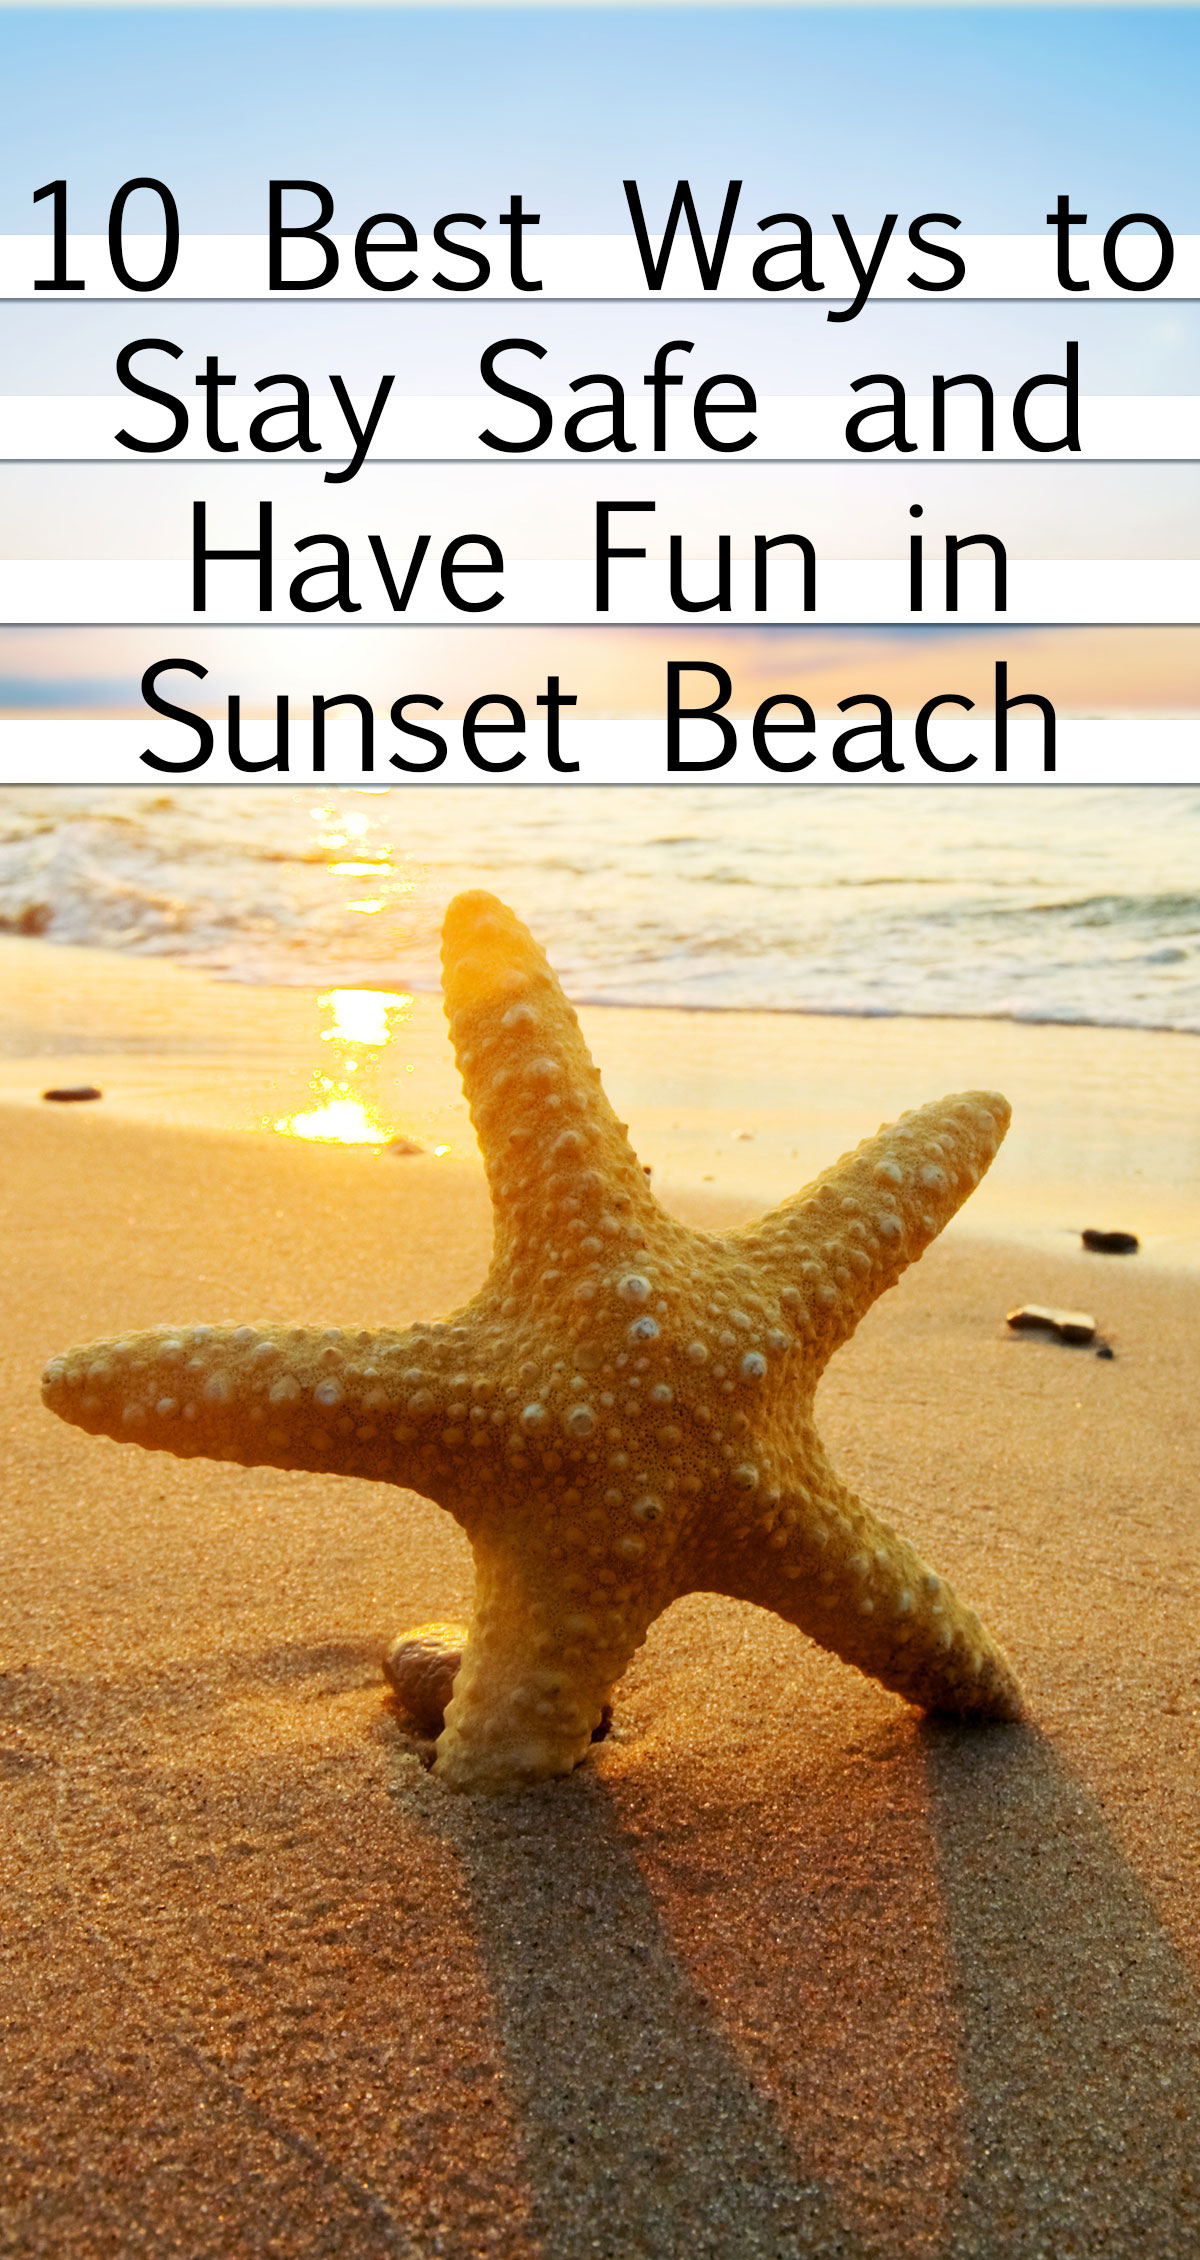 10 Best Ways to Stay Safe and Have Fun in Sunset Beach Pin